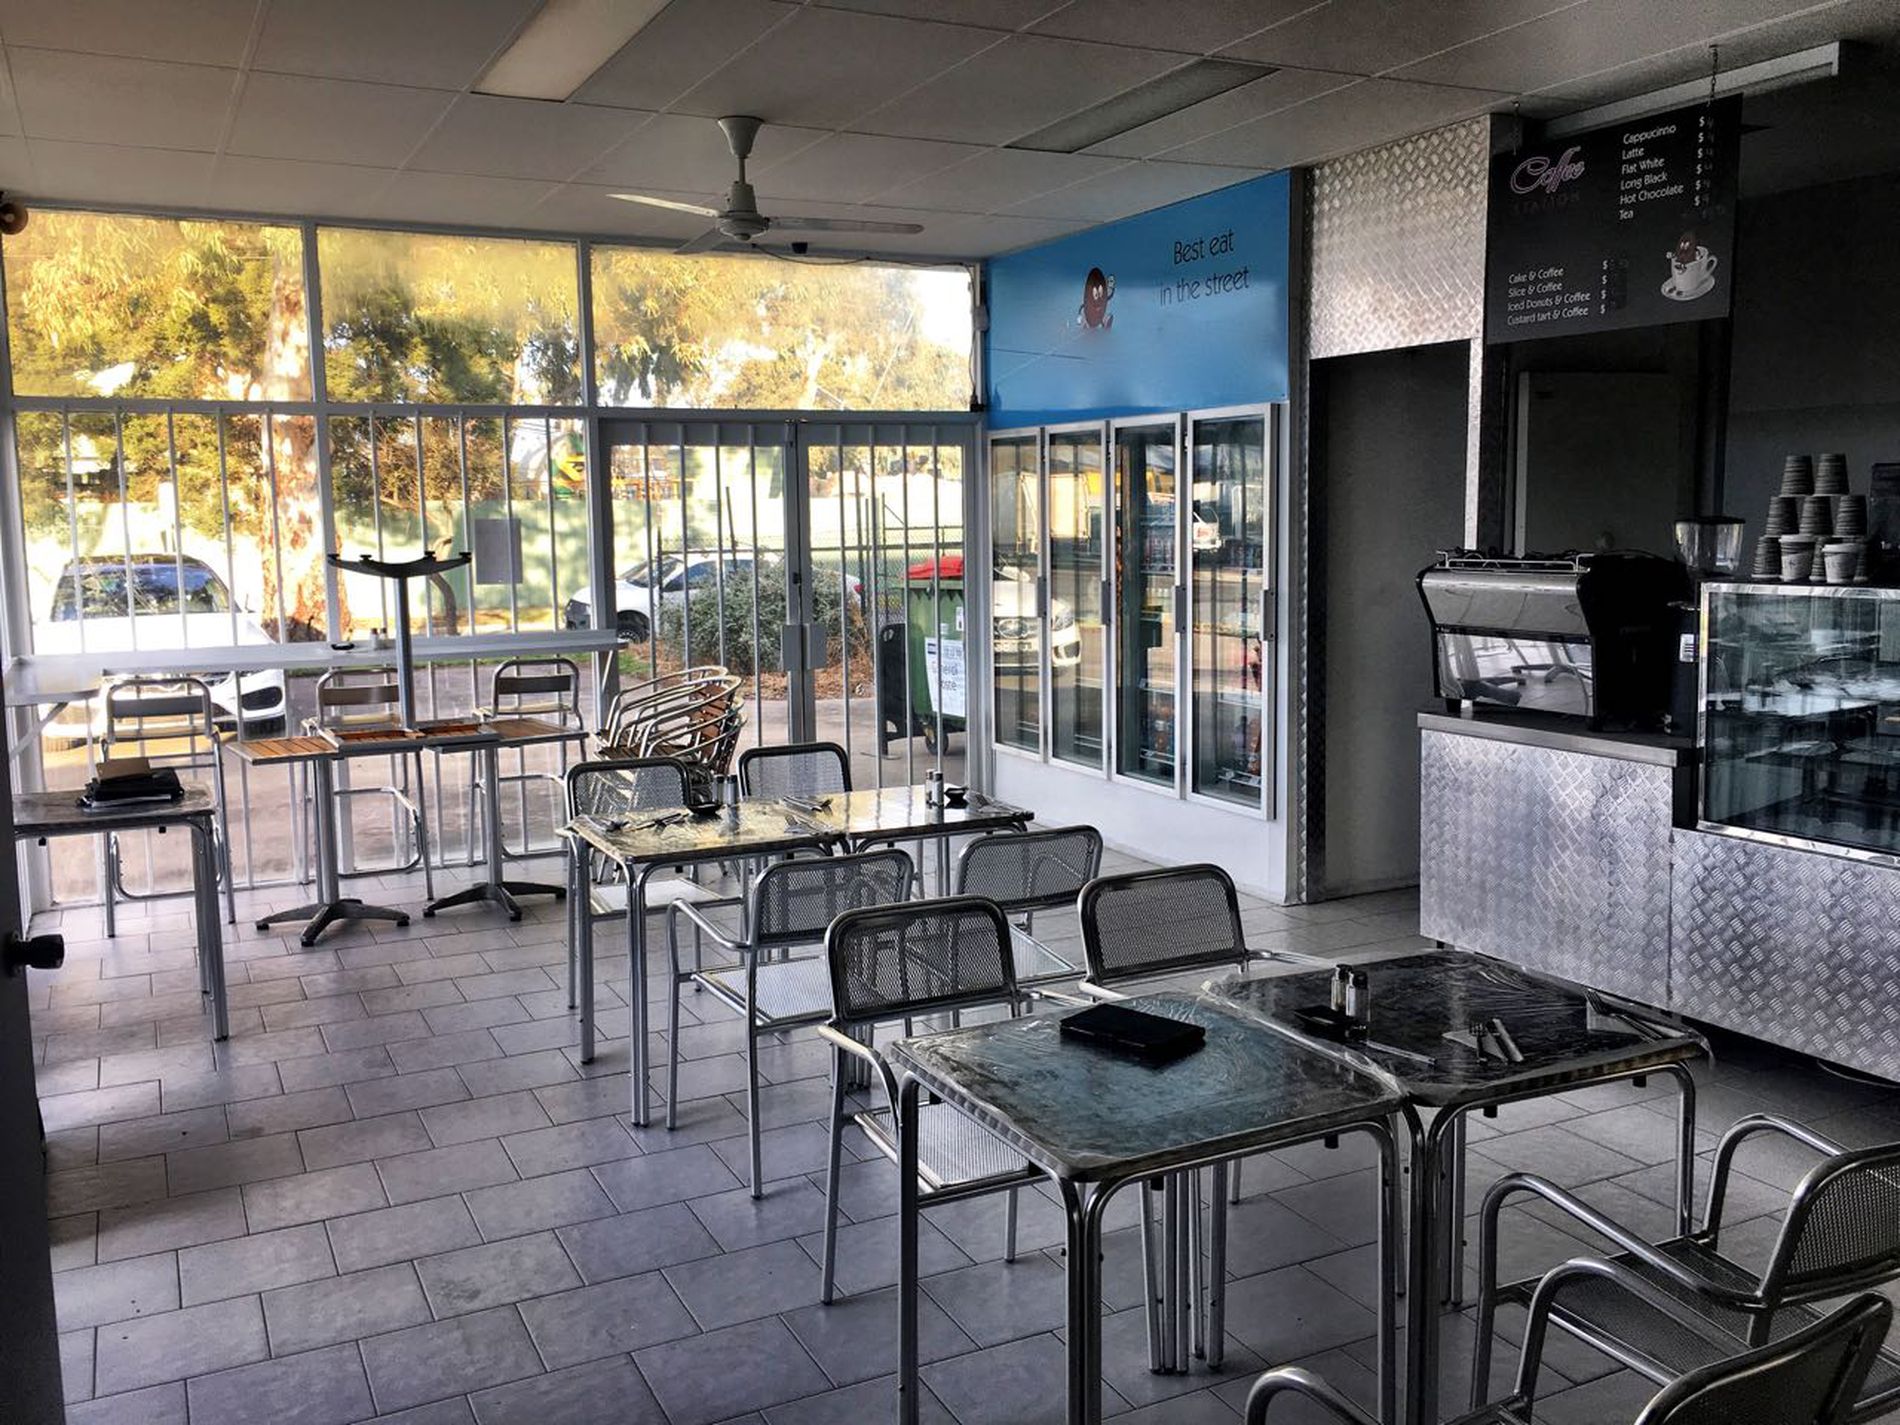 SOLD - Industrial Lifestyle Cafe Takeaway Business For Sale